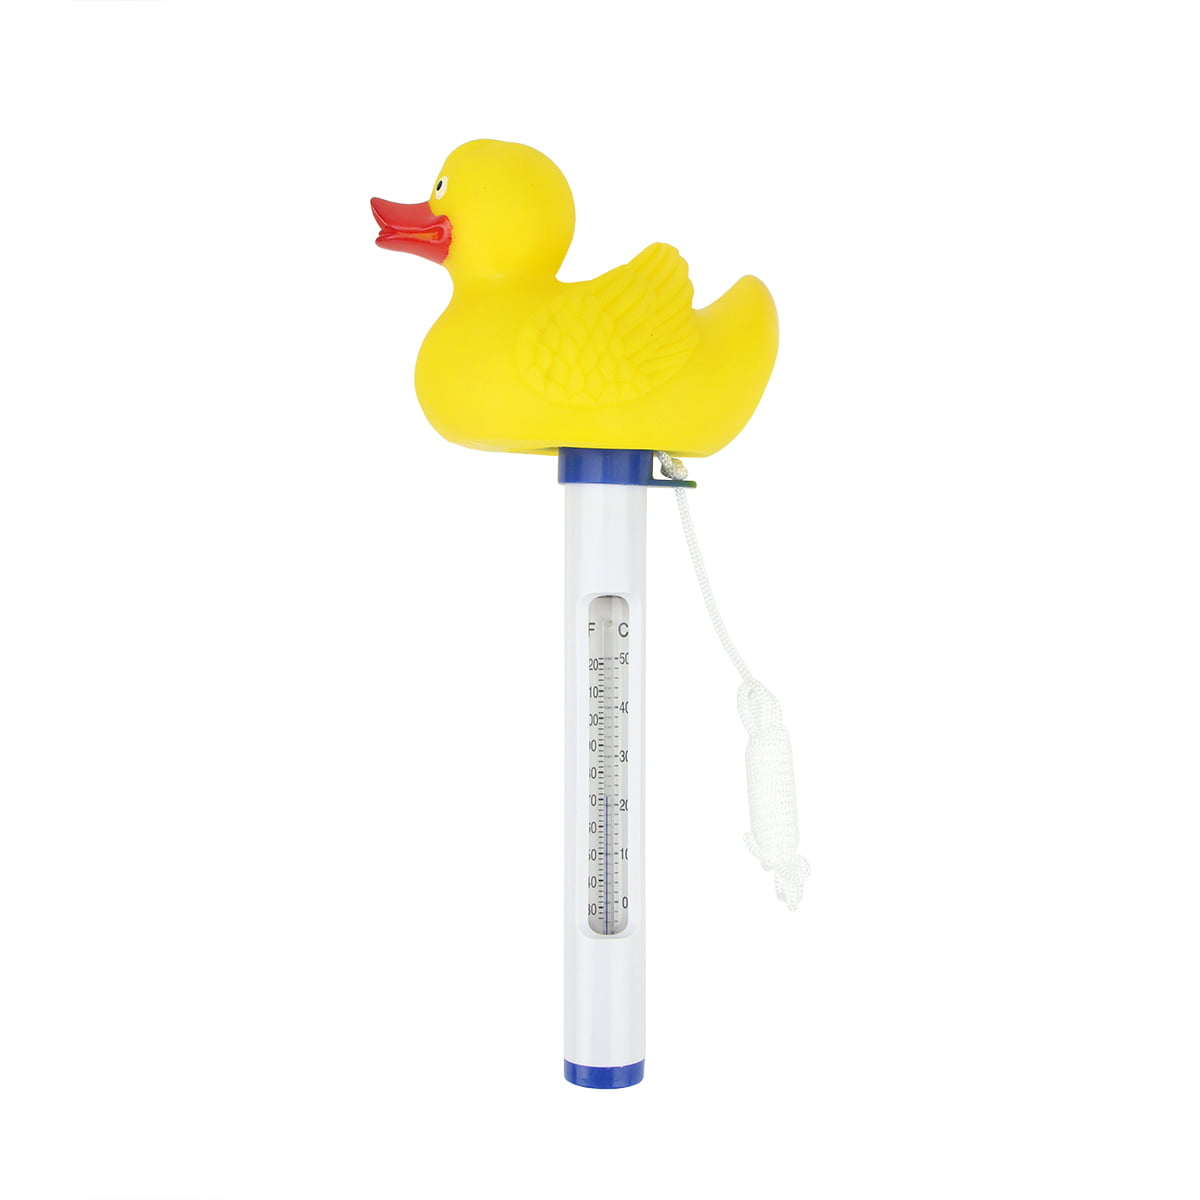 Accurate & Durable Spa & Pool Floating Thermometer w/ Adorable Rubber Ducky 